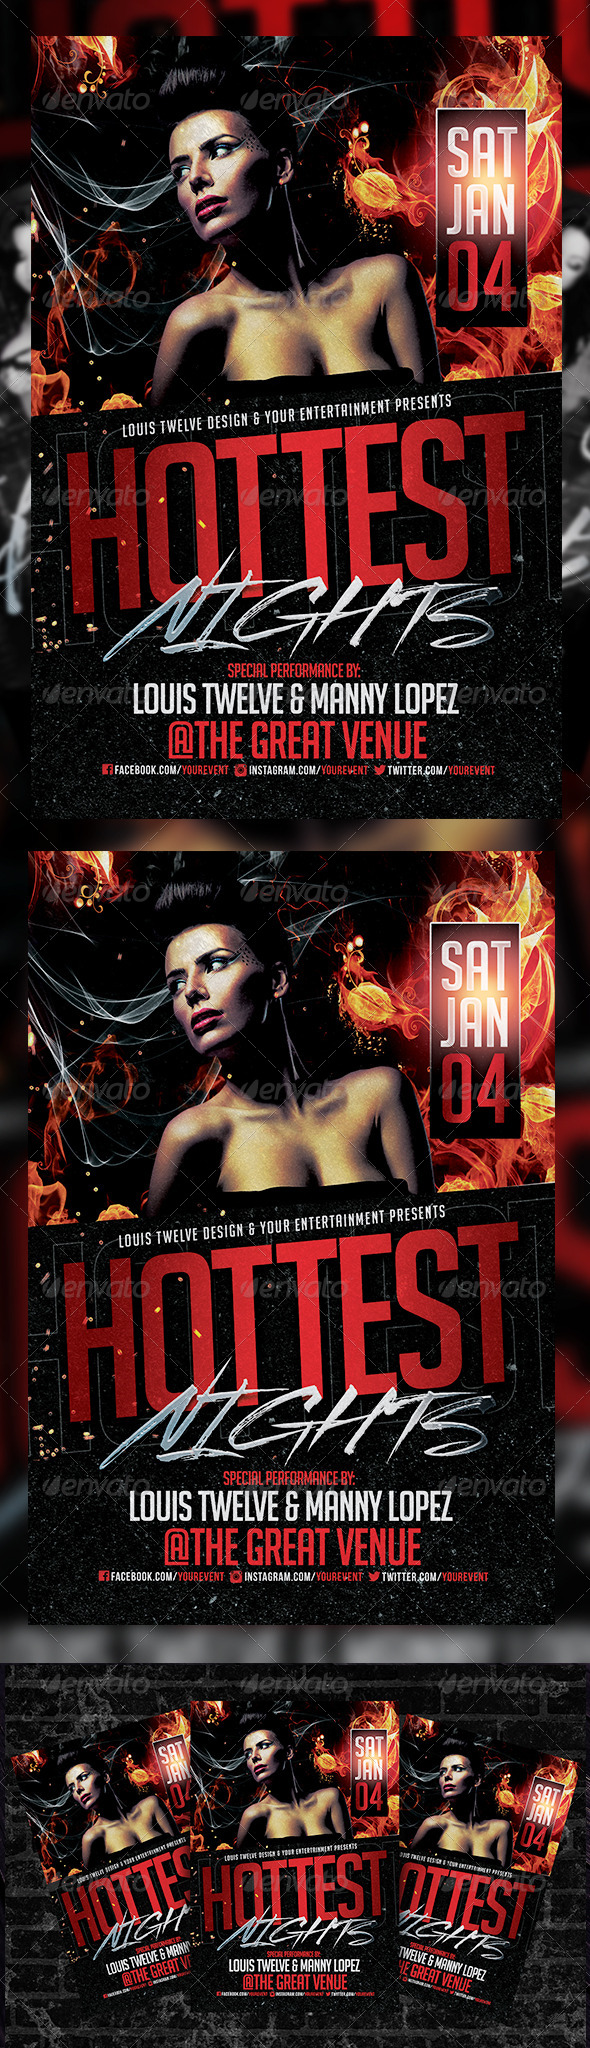 Hottest Nights Flyer Template